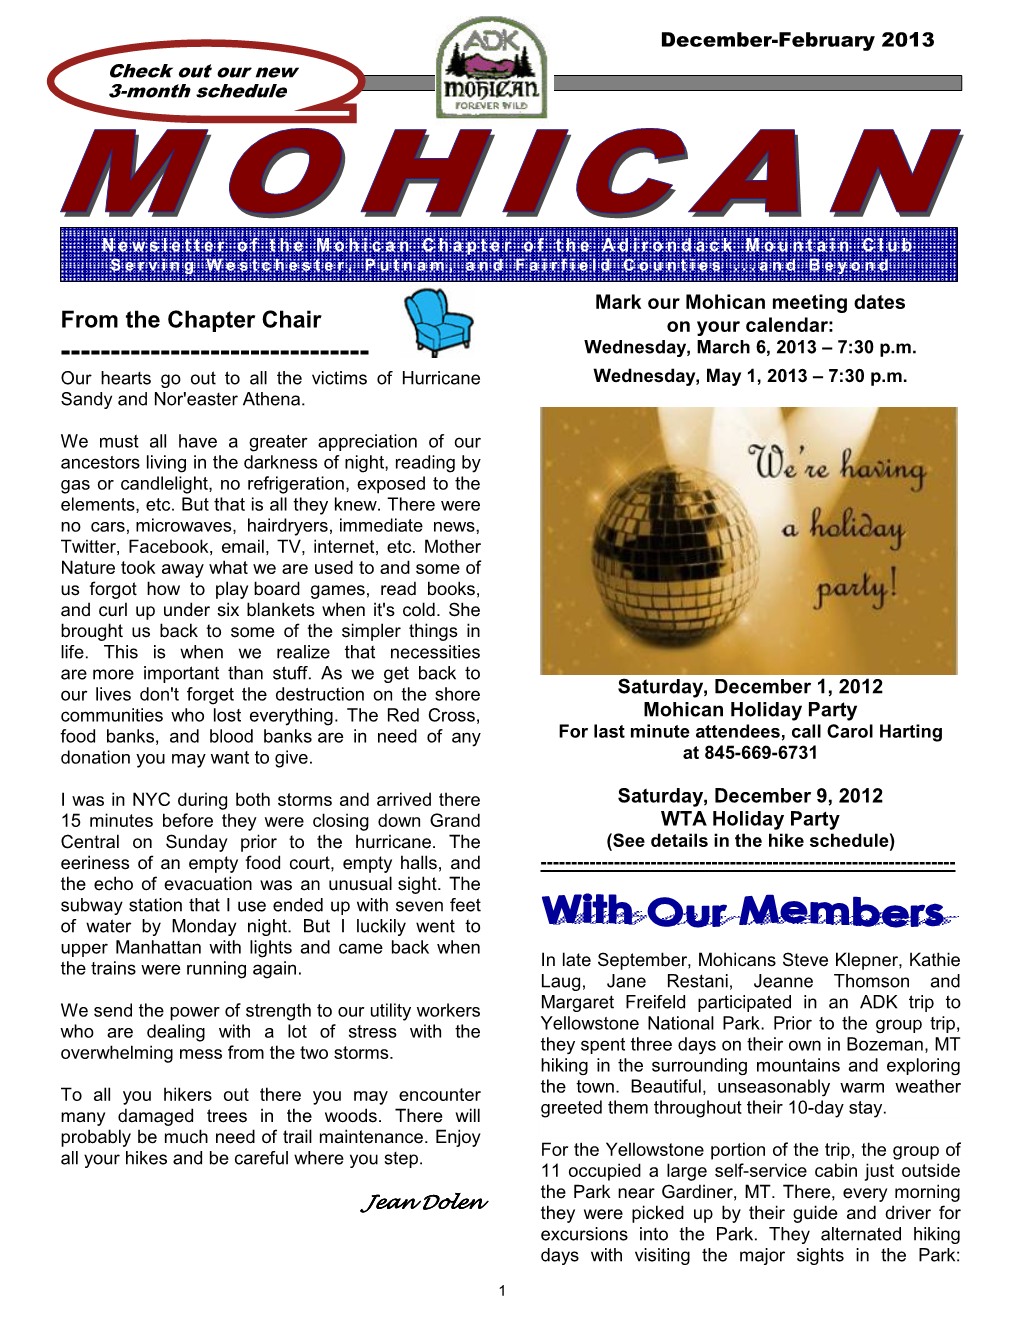 From the Chapter Chair on Your Calendar: Wednesday, March 6, 2013 – 7:30 P.M